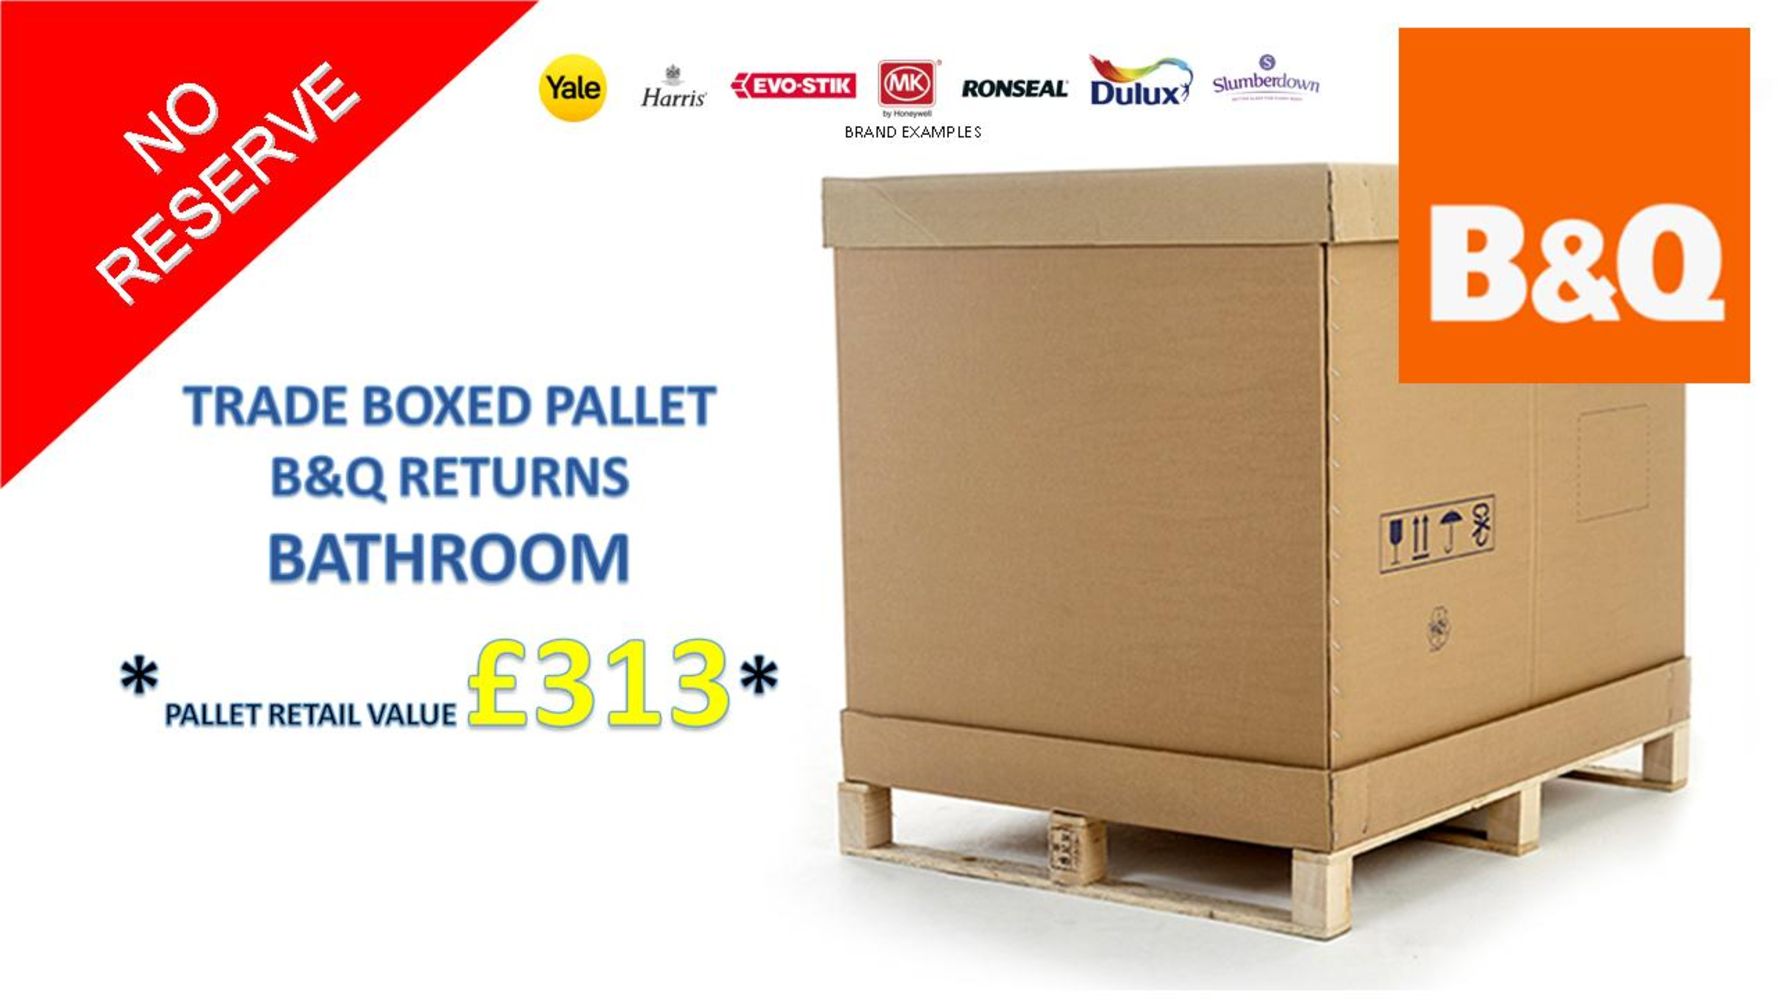 Pallet Sale of B&Q Raw Returns - Starting Bids at 10% of Retail Value - Opportunity for Huge Savings